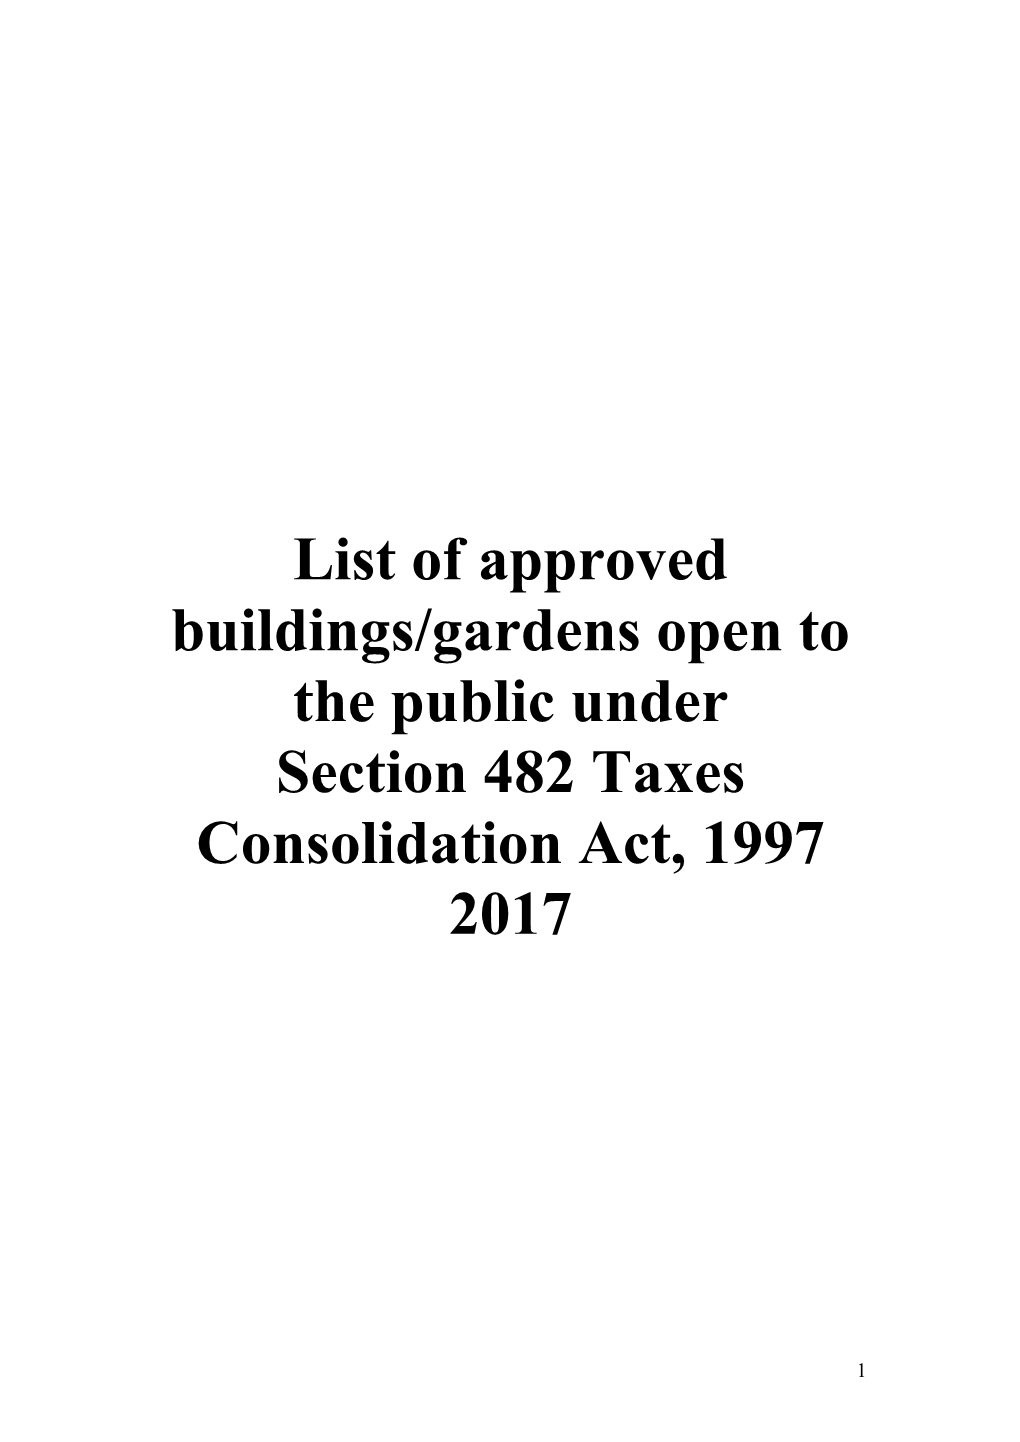 Section 482, Taxes Consolidation Act, 1997